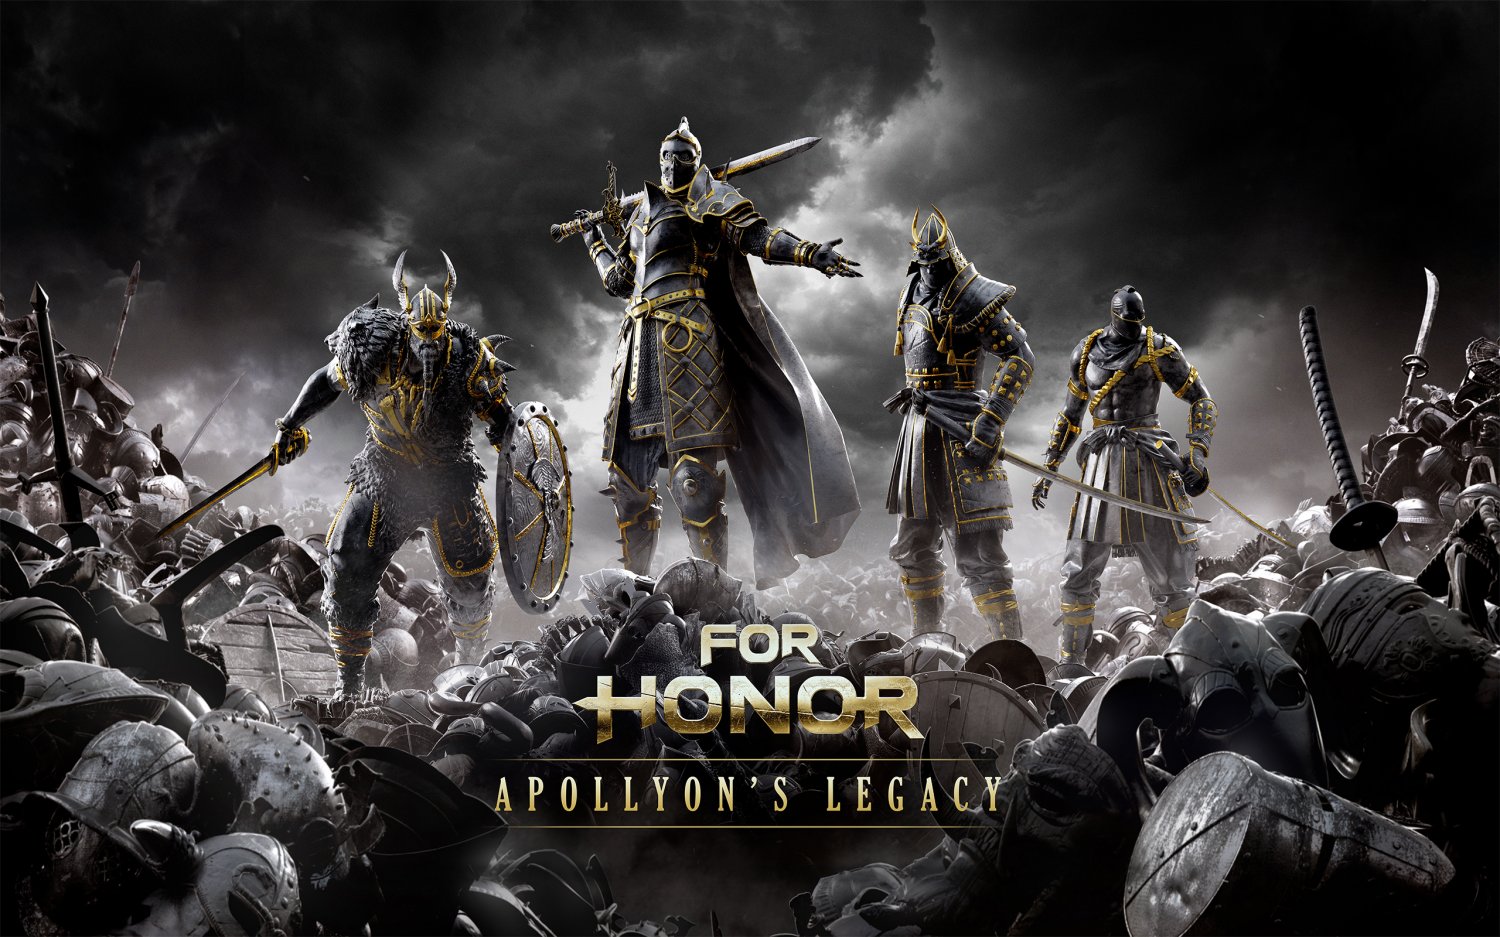 For Honor Apollyon's Legacy   13"x19" (32cm/49cm) Polyester Fabric Poster